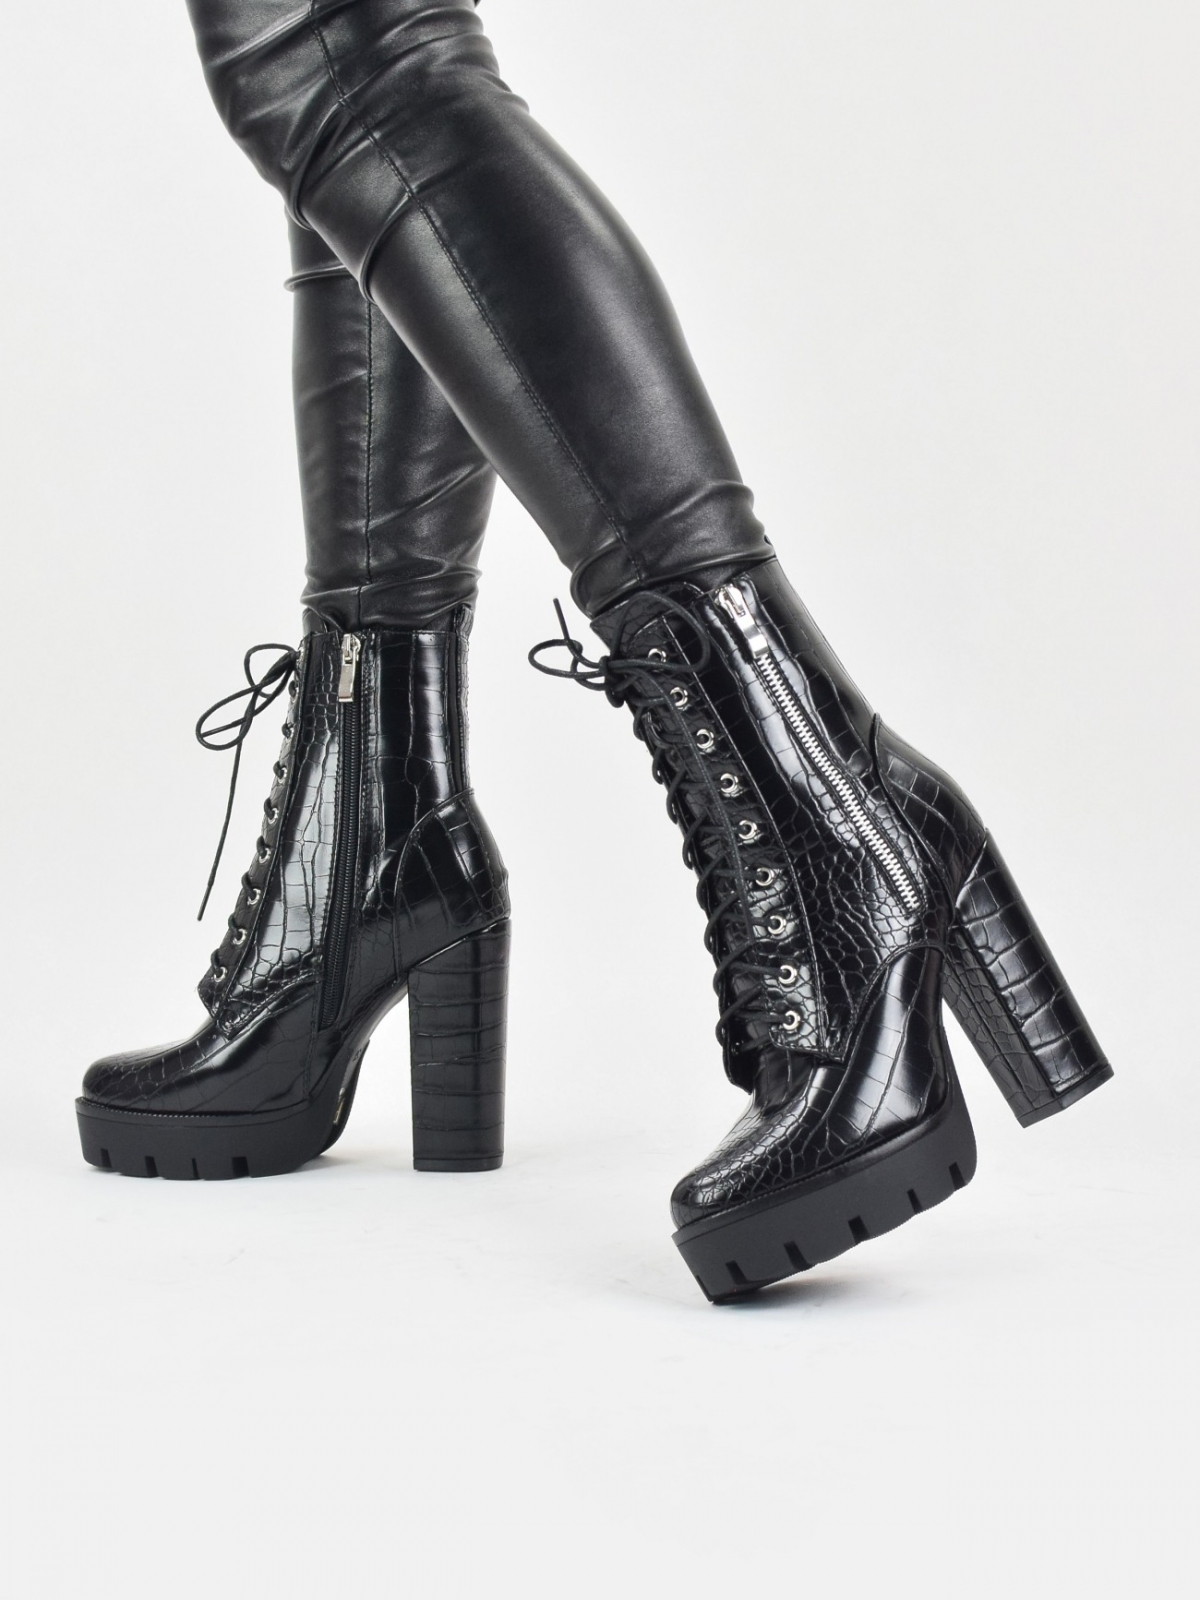 High heeled lace up platform boots with outside zip detail in black snake patent